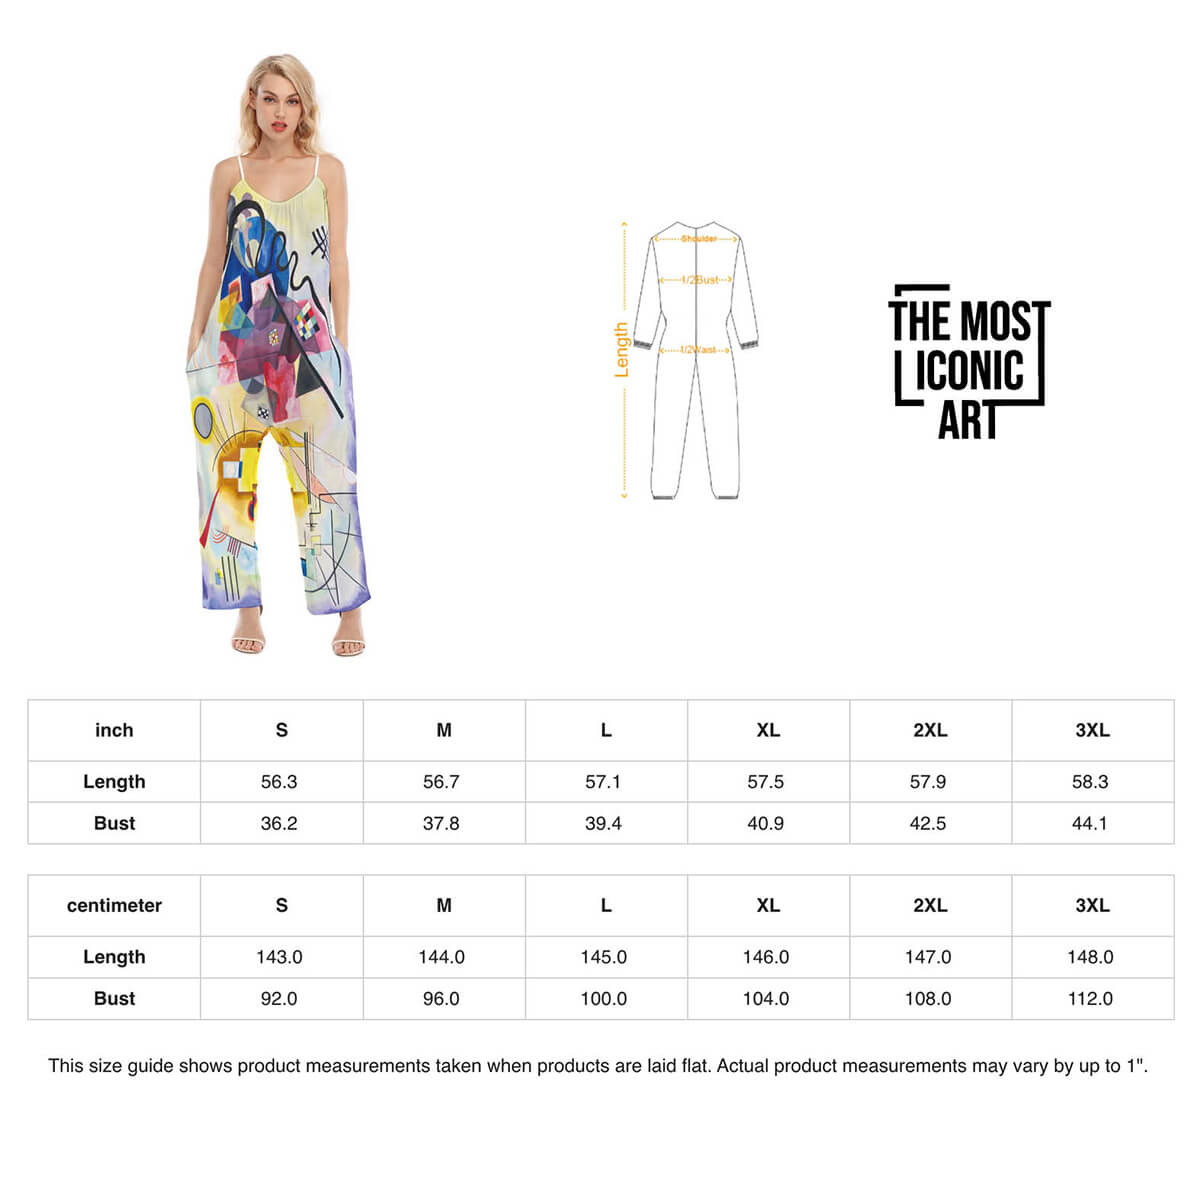 Colorful art-inspired fashion for women